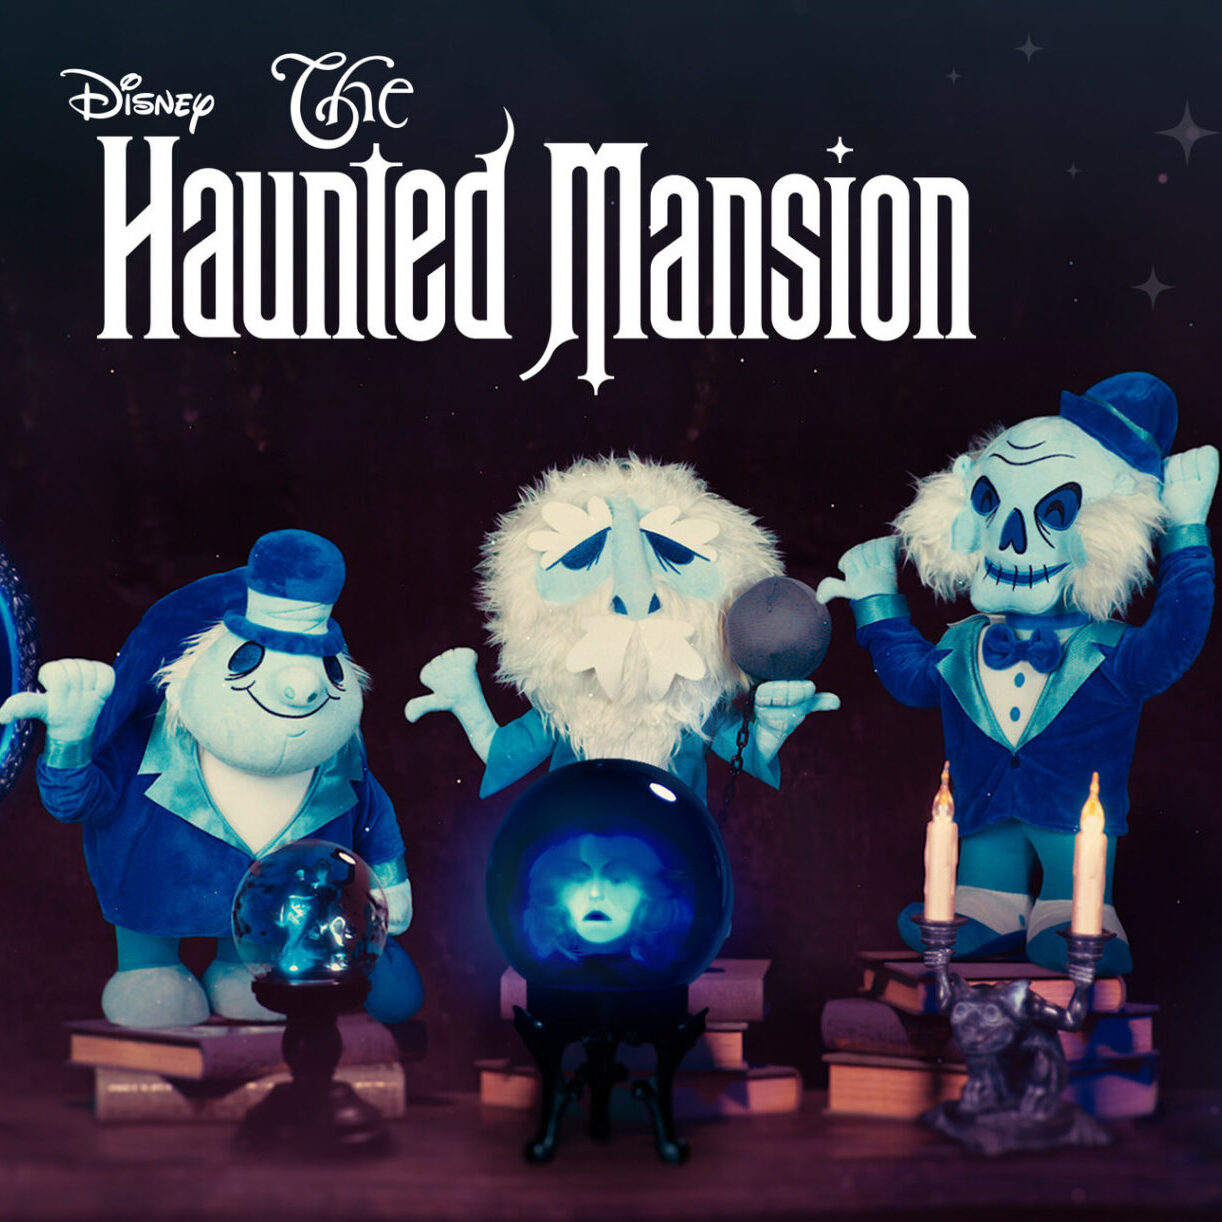 Gemmy Industries Introduces Disney’s ‘The Haunted Mansion’ Halloween